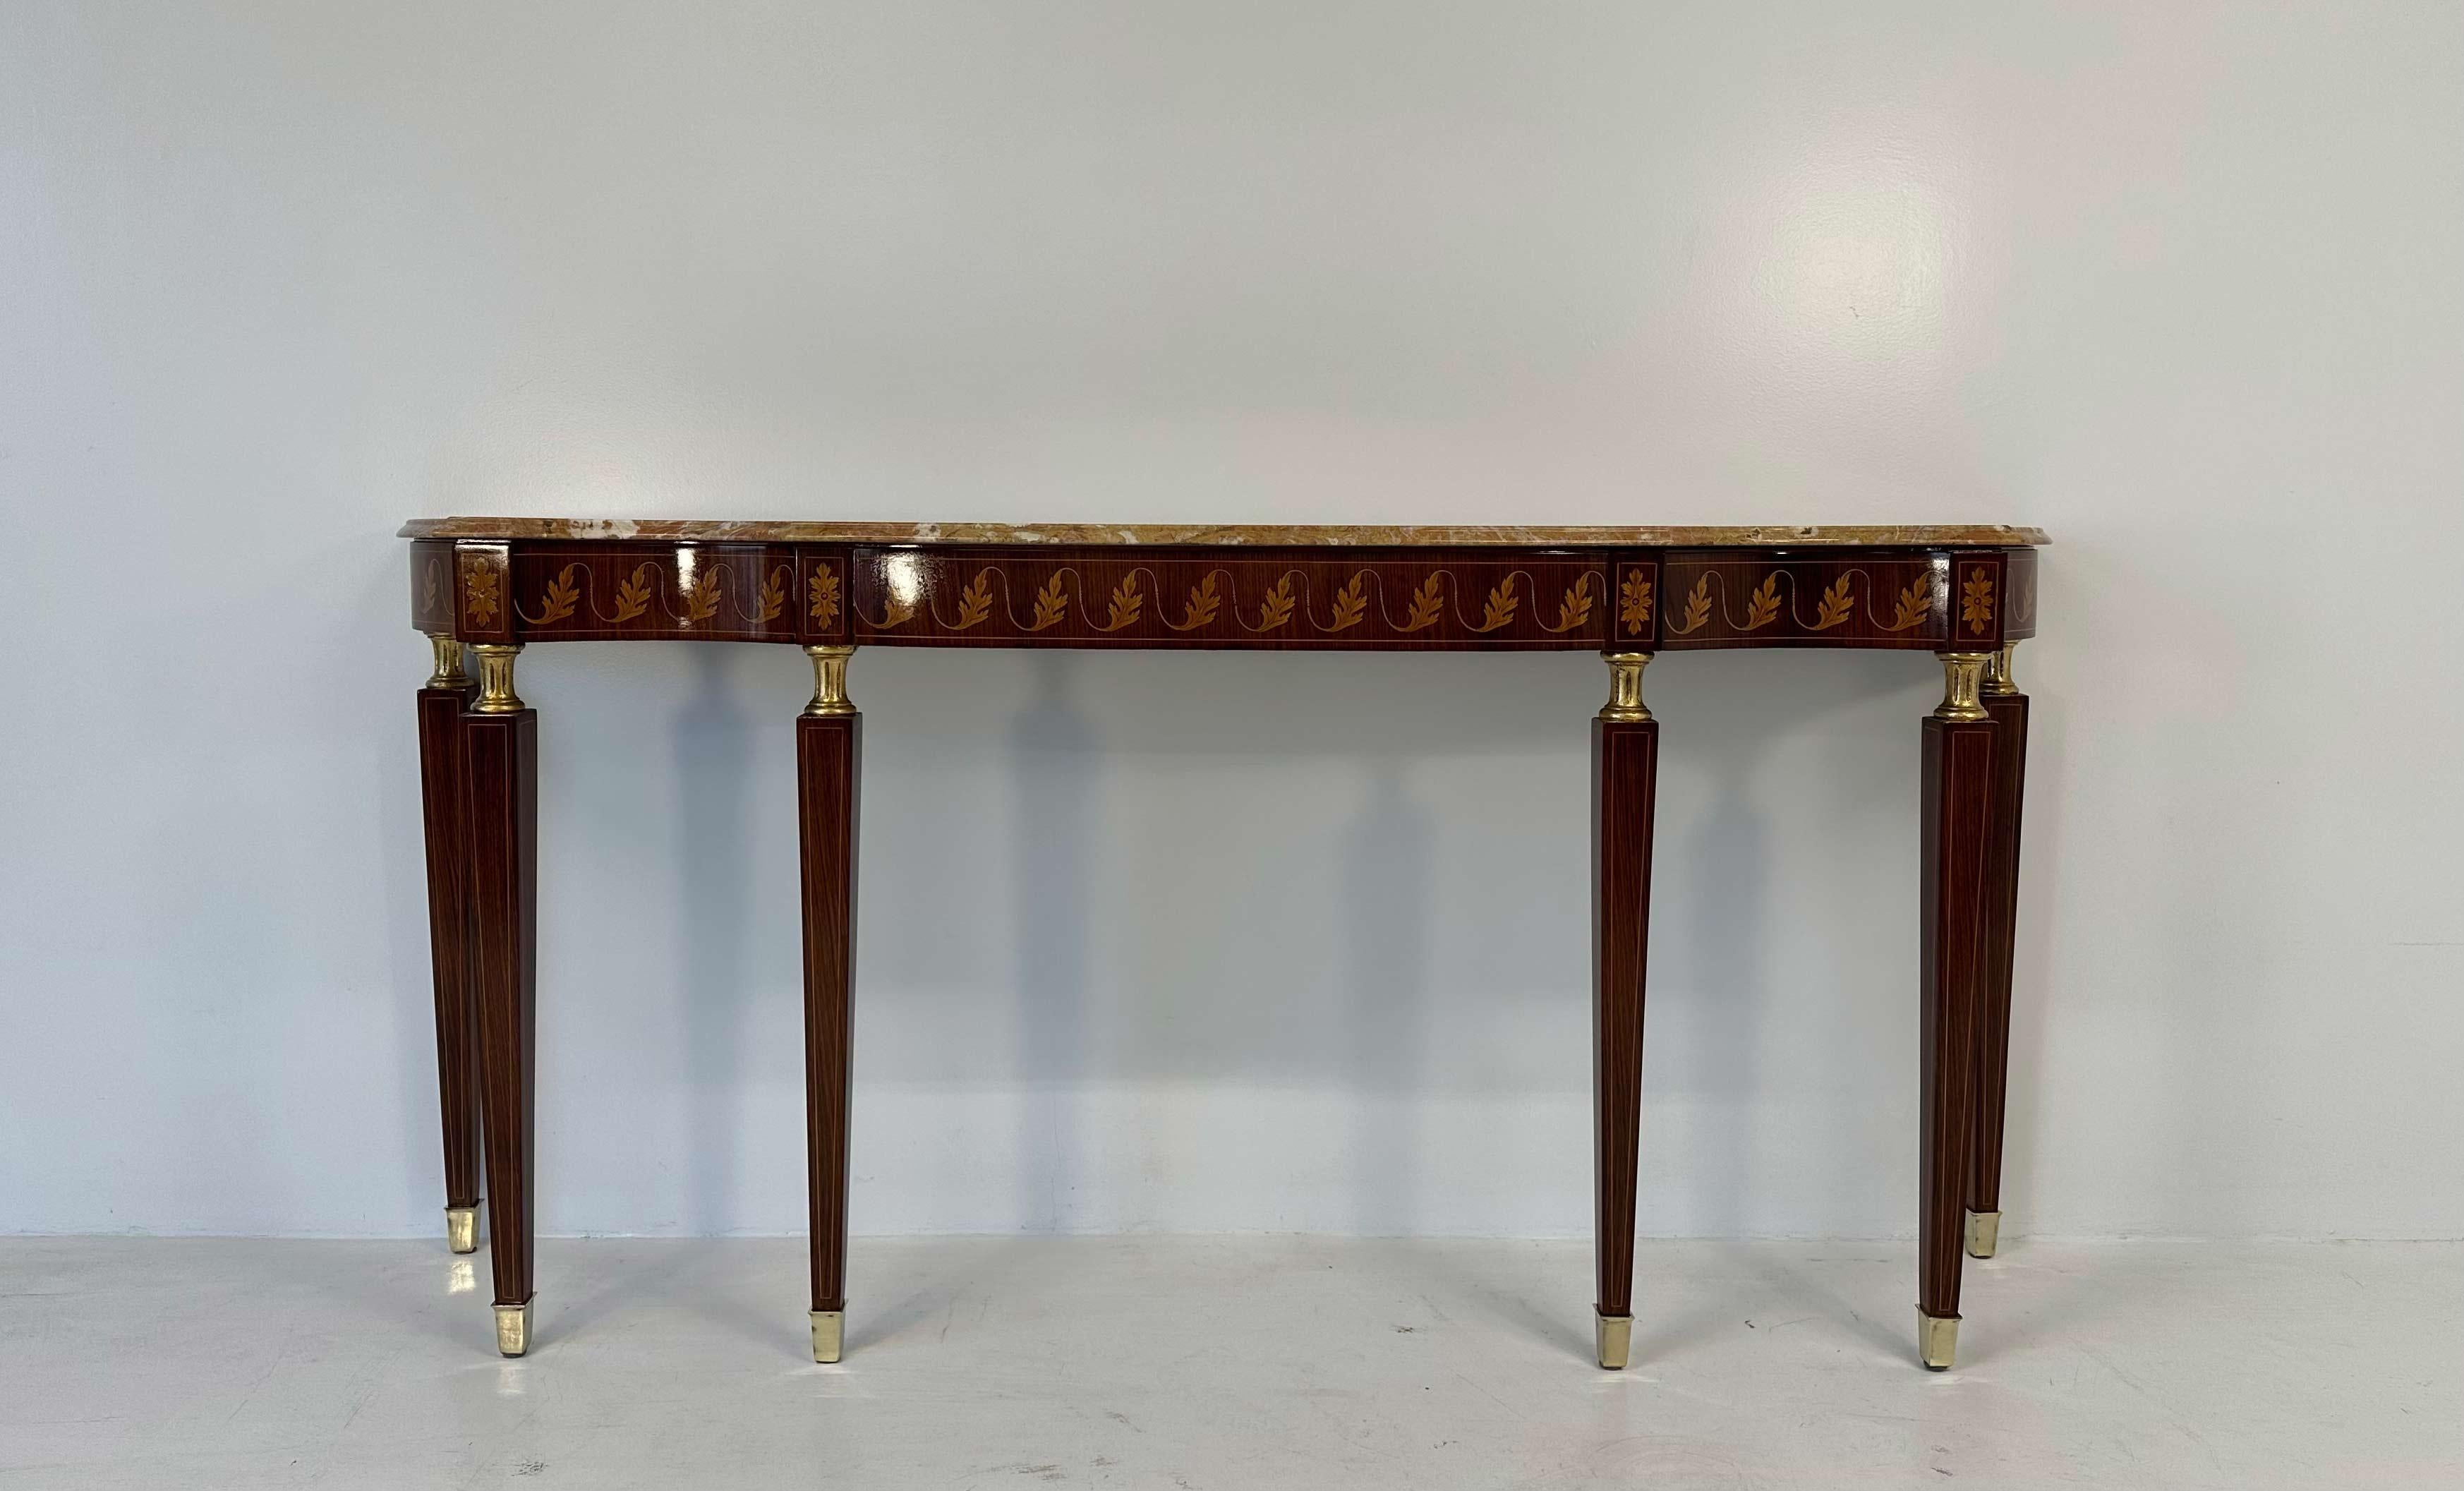 This console was produced in Italy in the 1950s and can be attributed to the design of Paolo Buffa. The top is a marble slab that lays on a structure made of precious wood, characterized by the presence of an elegant inlay depicting a classic motif